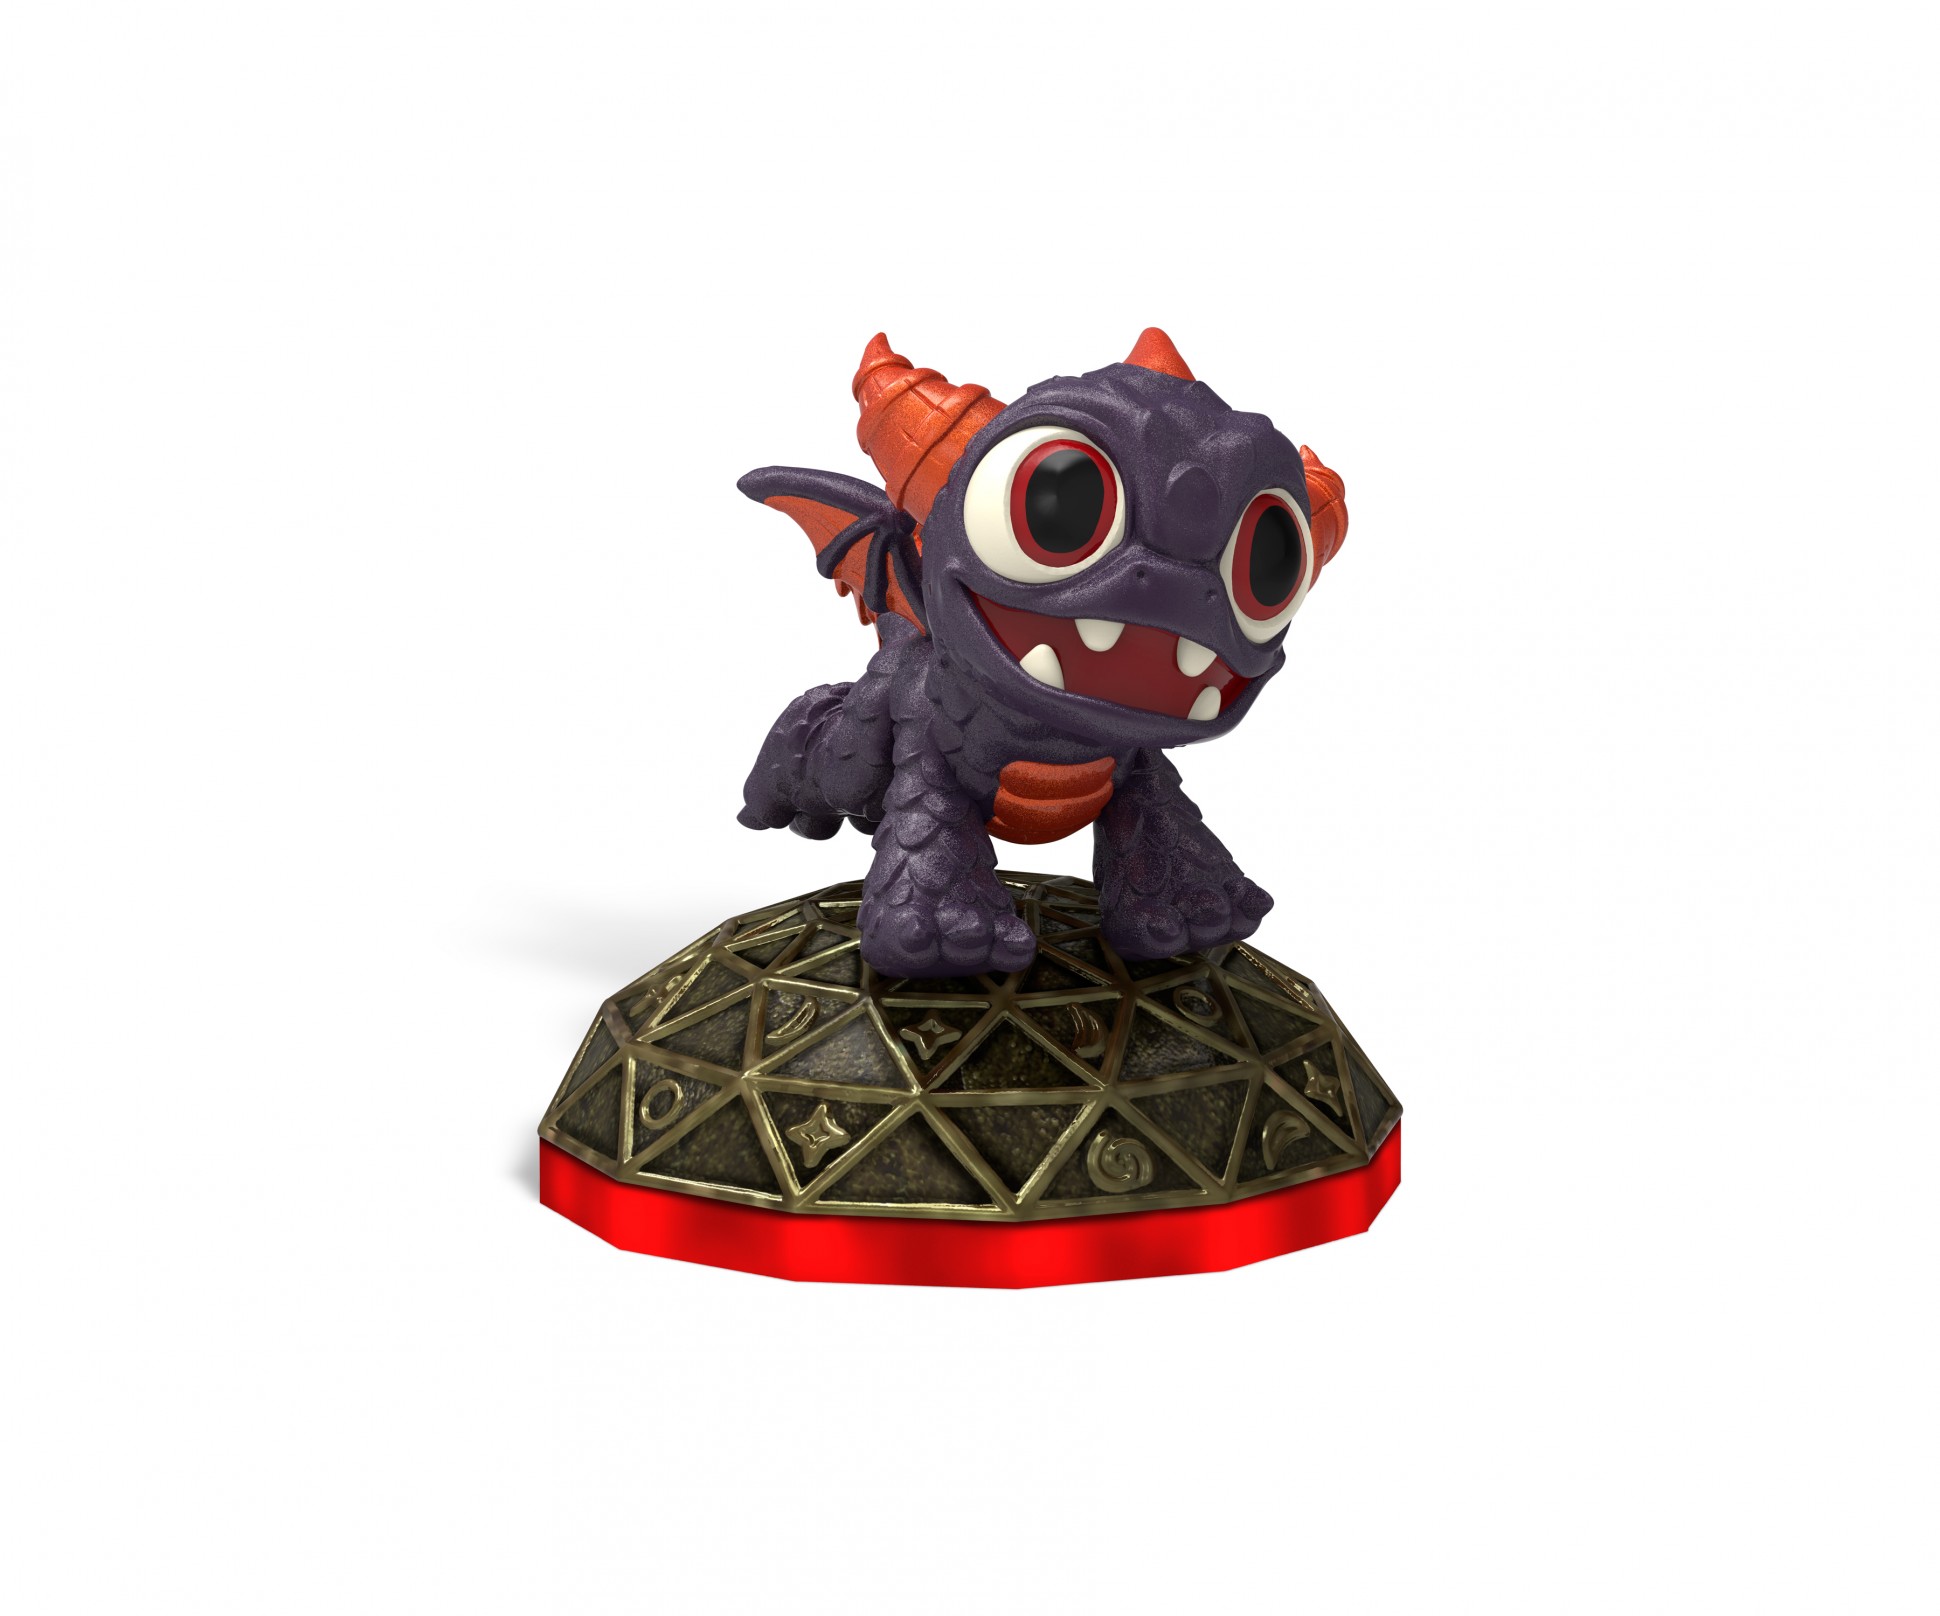 Check out the new Skylanders Minis for Trap Team